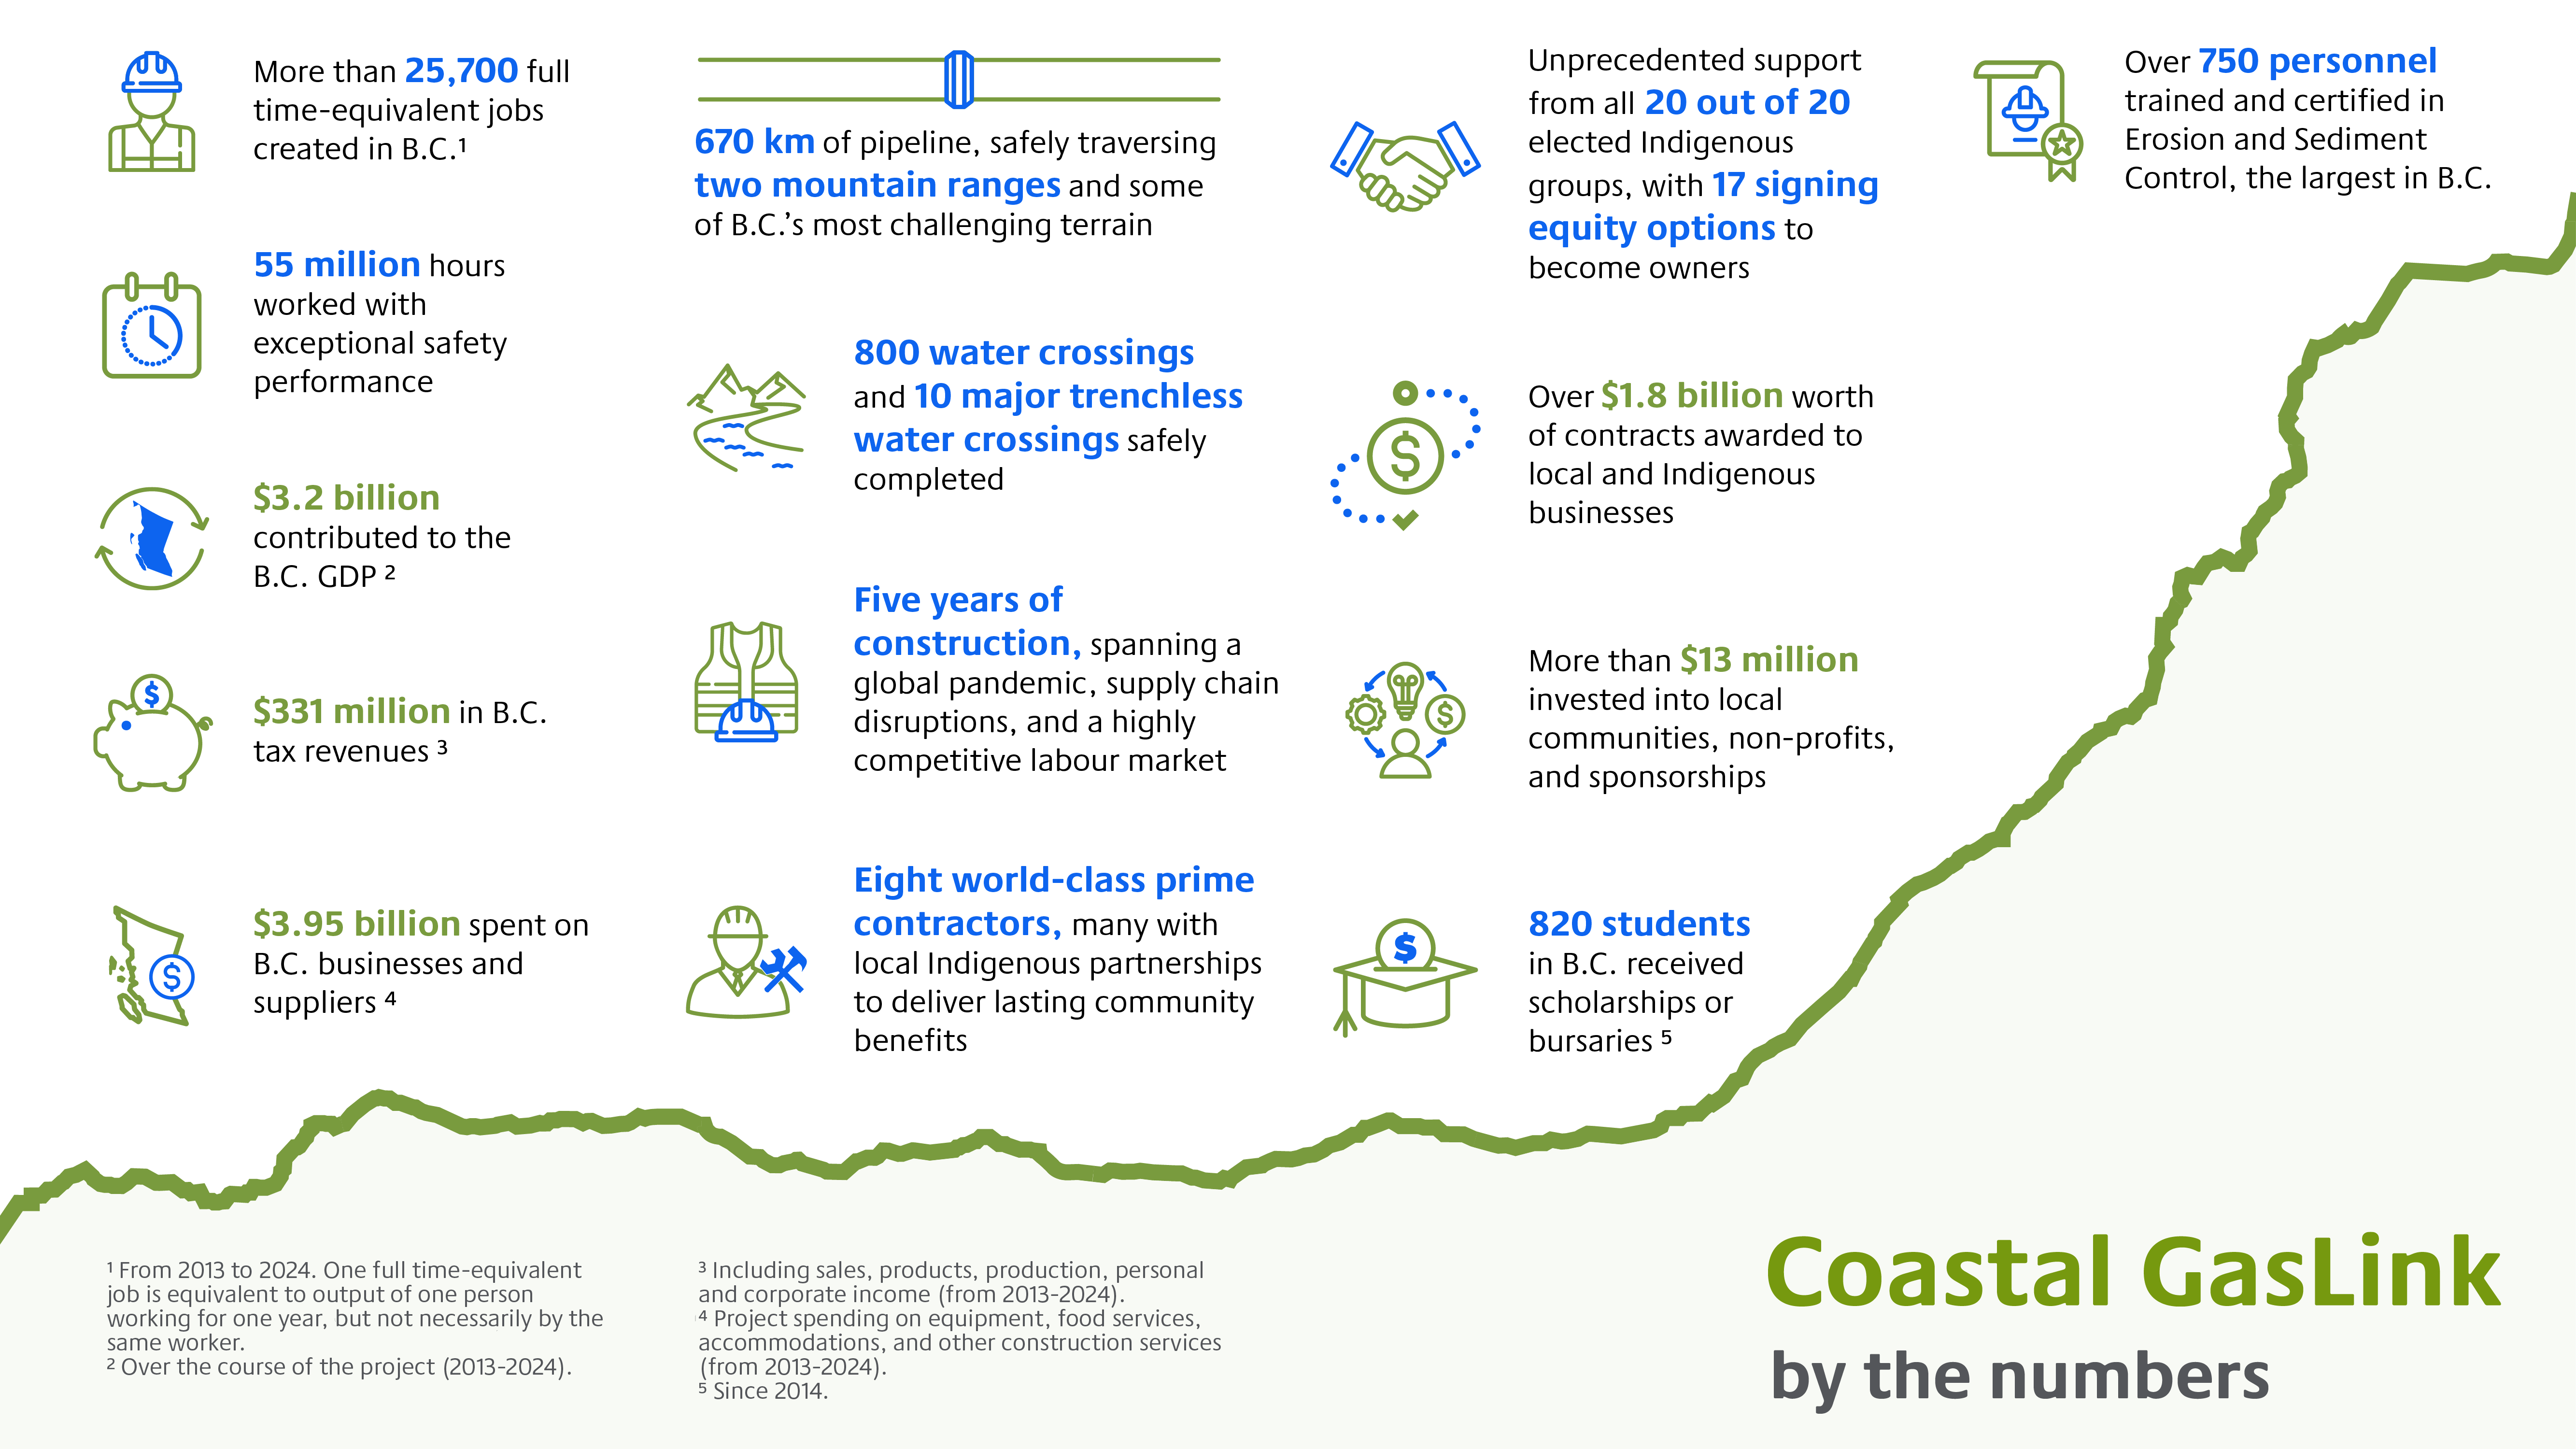 Coastal GasLink by the numbers infographic